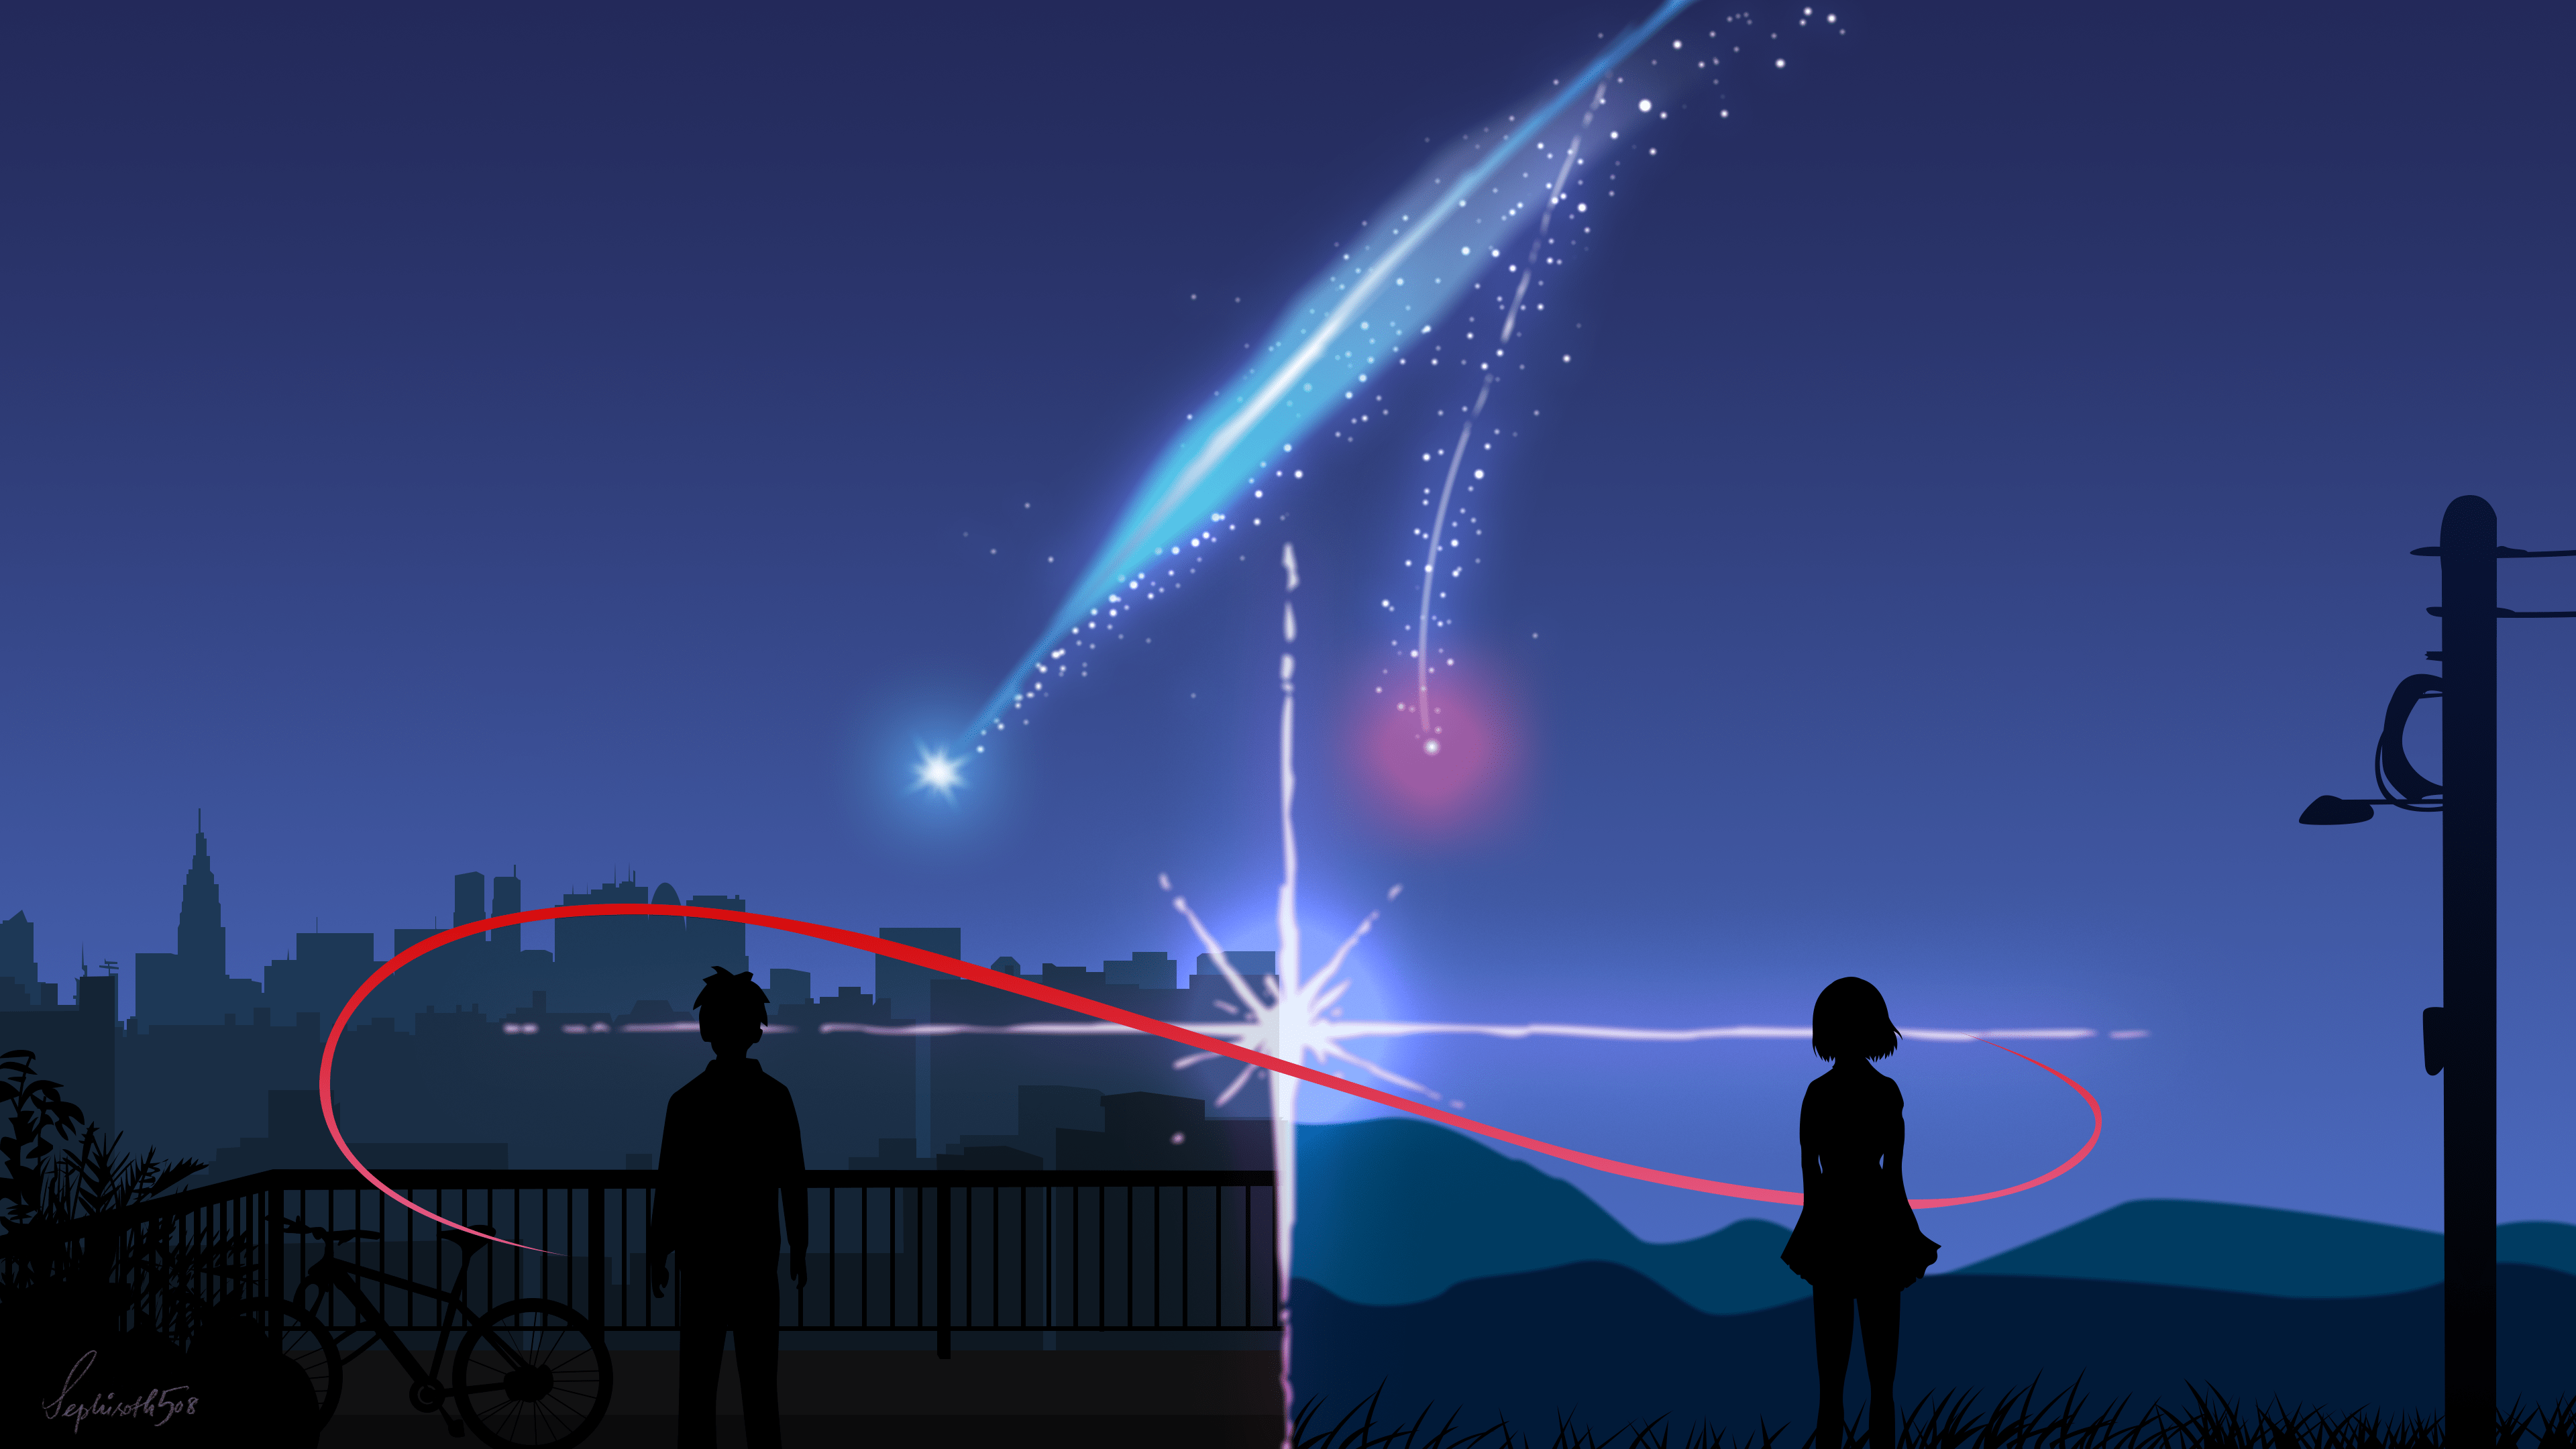 Your Name 4k HD Wallpapers - Top Free Your Name 4k HD Backgrounds